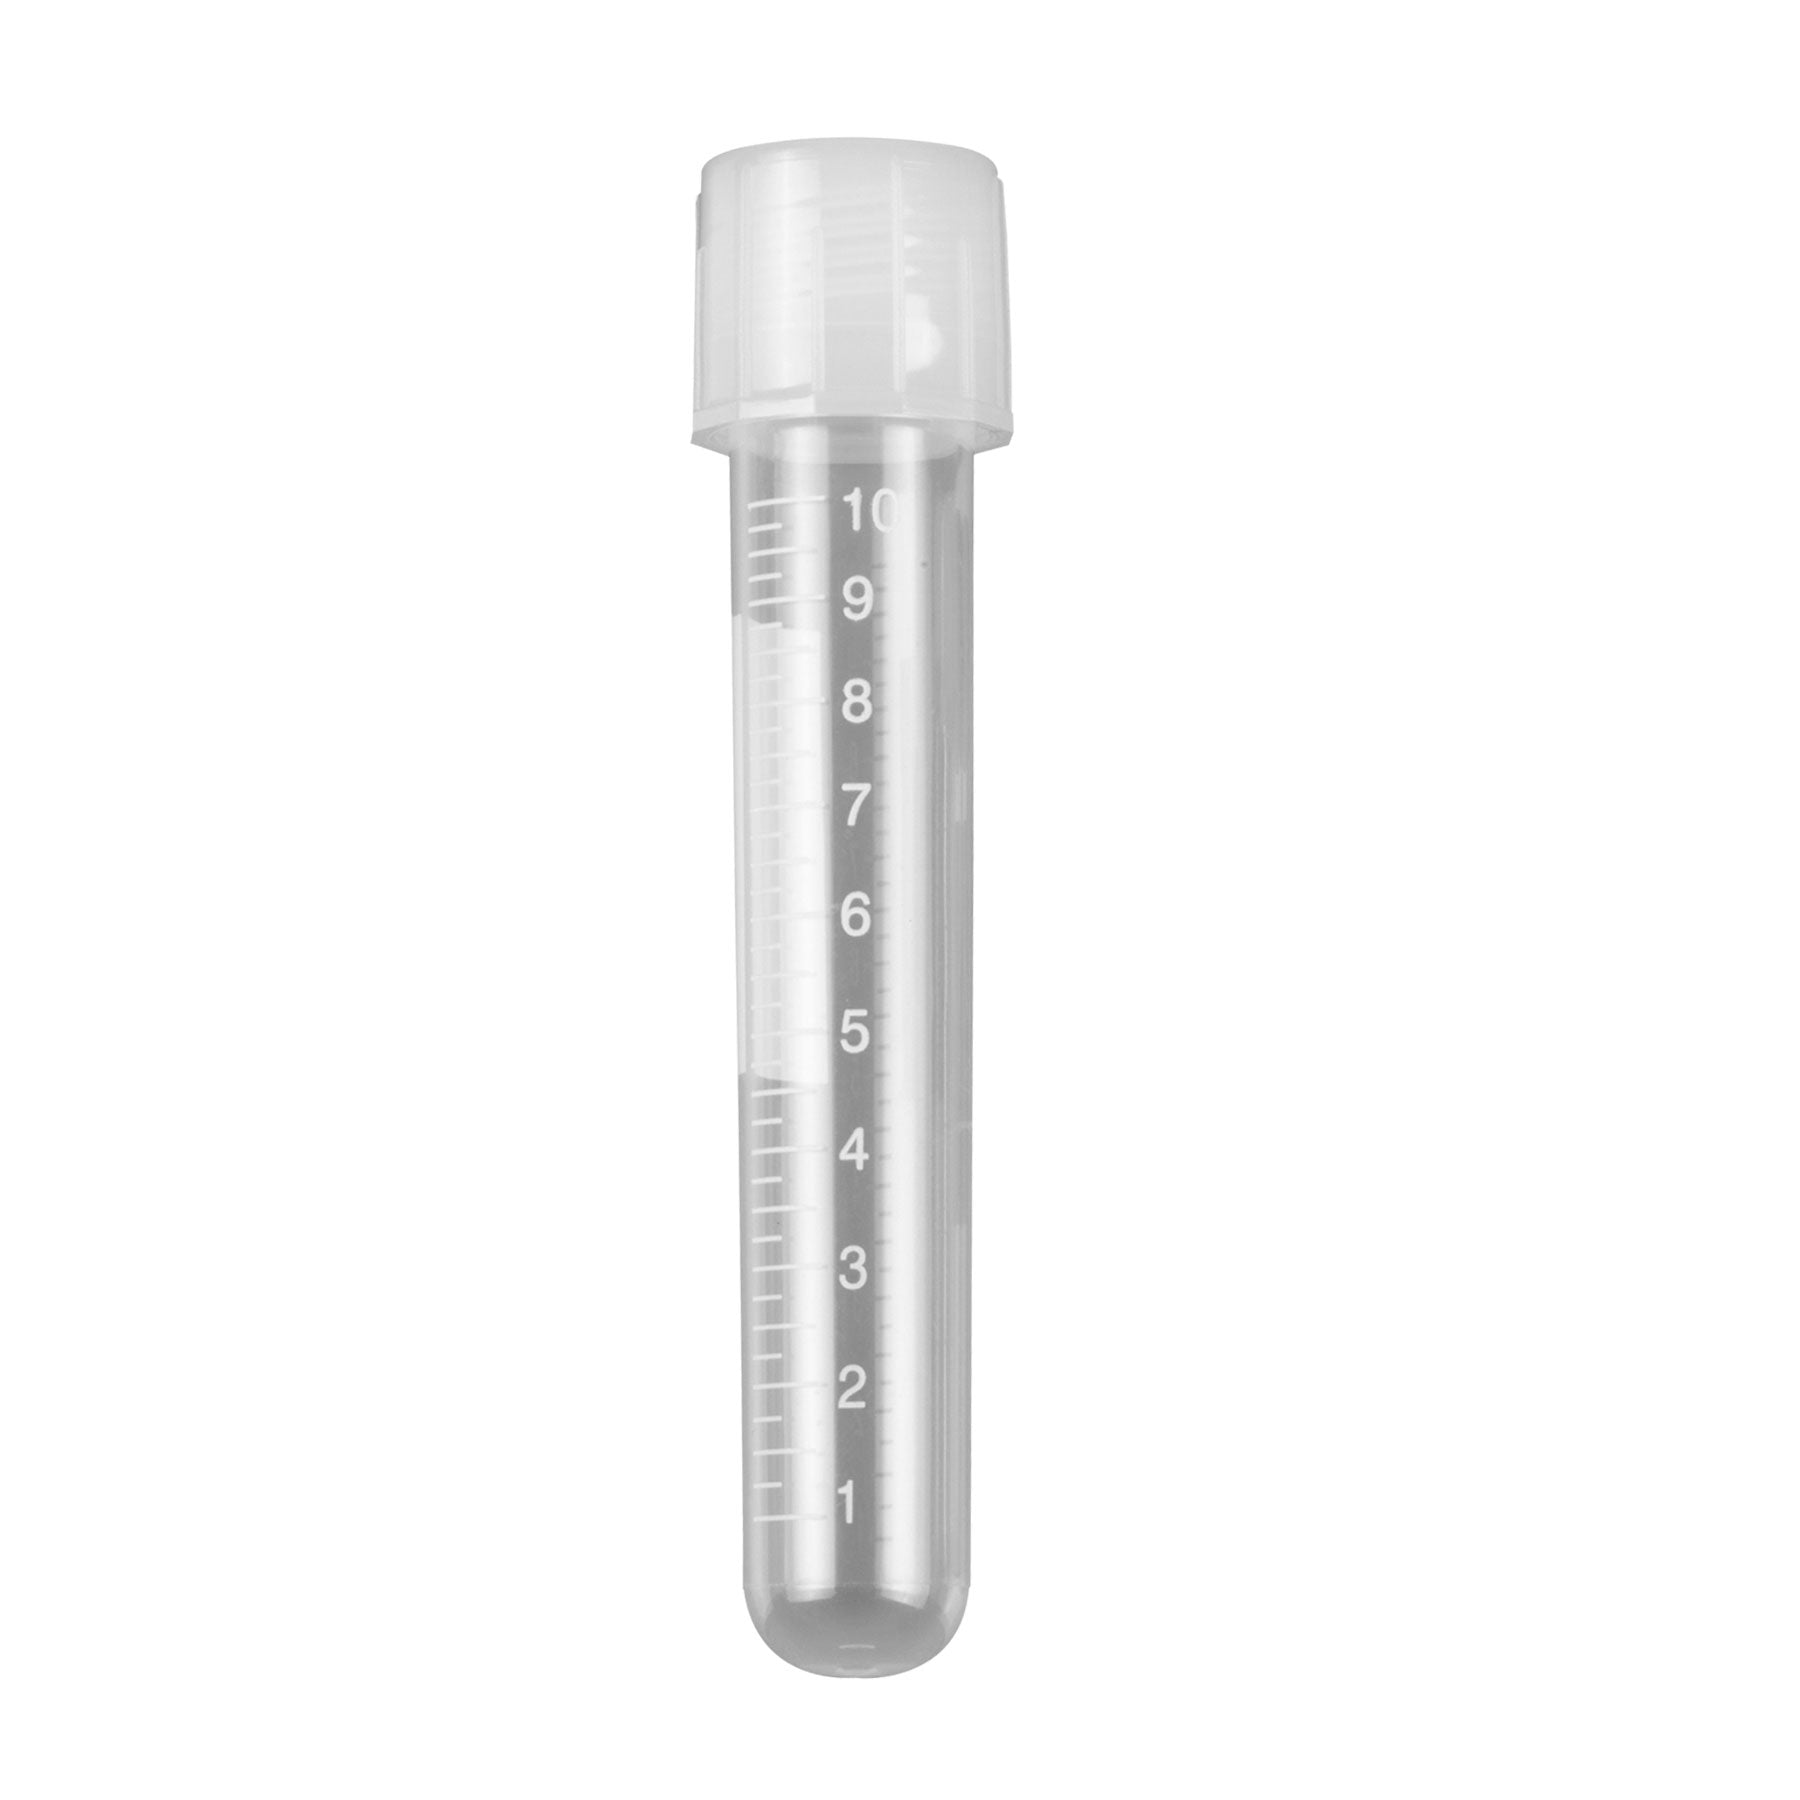 MTC Bio T8832, DuoClick Culture Tube, 14ml, 17 X 100Mm, PP, with Attached 2-Position Screw-Cap, Printed Graduations, Sterile, 10 Foam Racks Of 50 Tubes, 500/Case